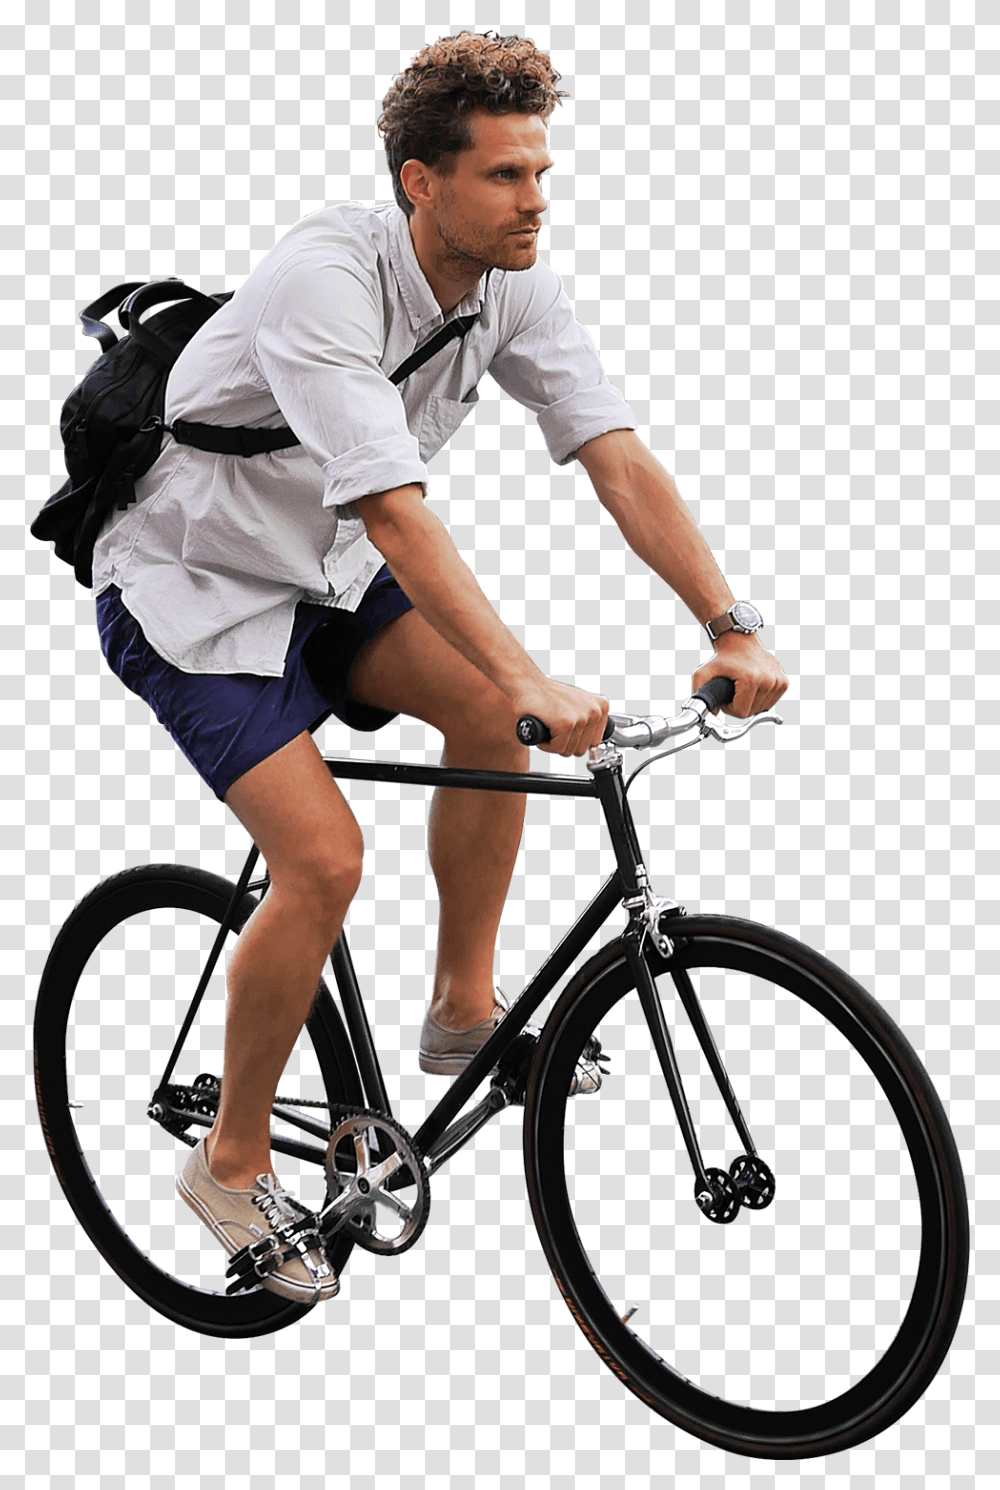 On His Bike Image Riding A Bike, Bicycle, Vehicle, Transportation, Person Transparent Png